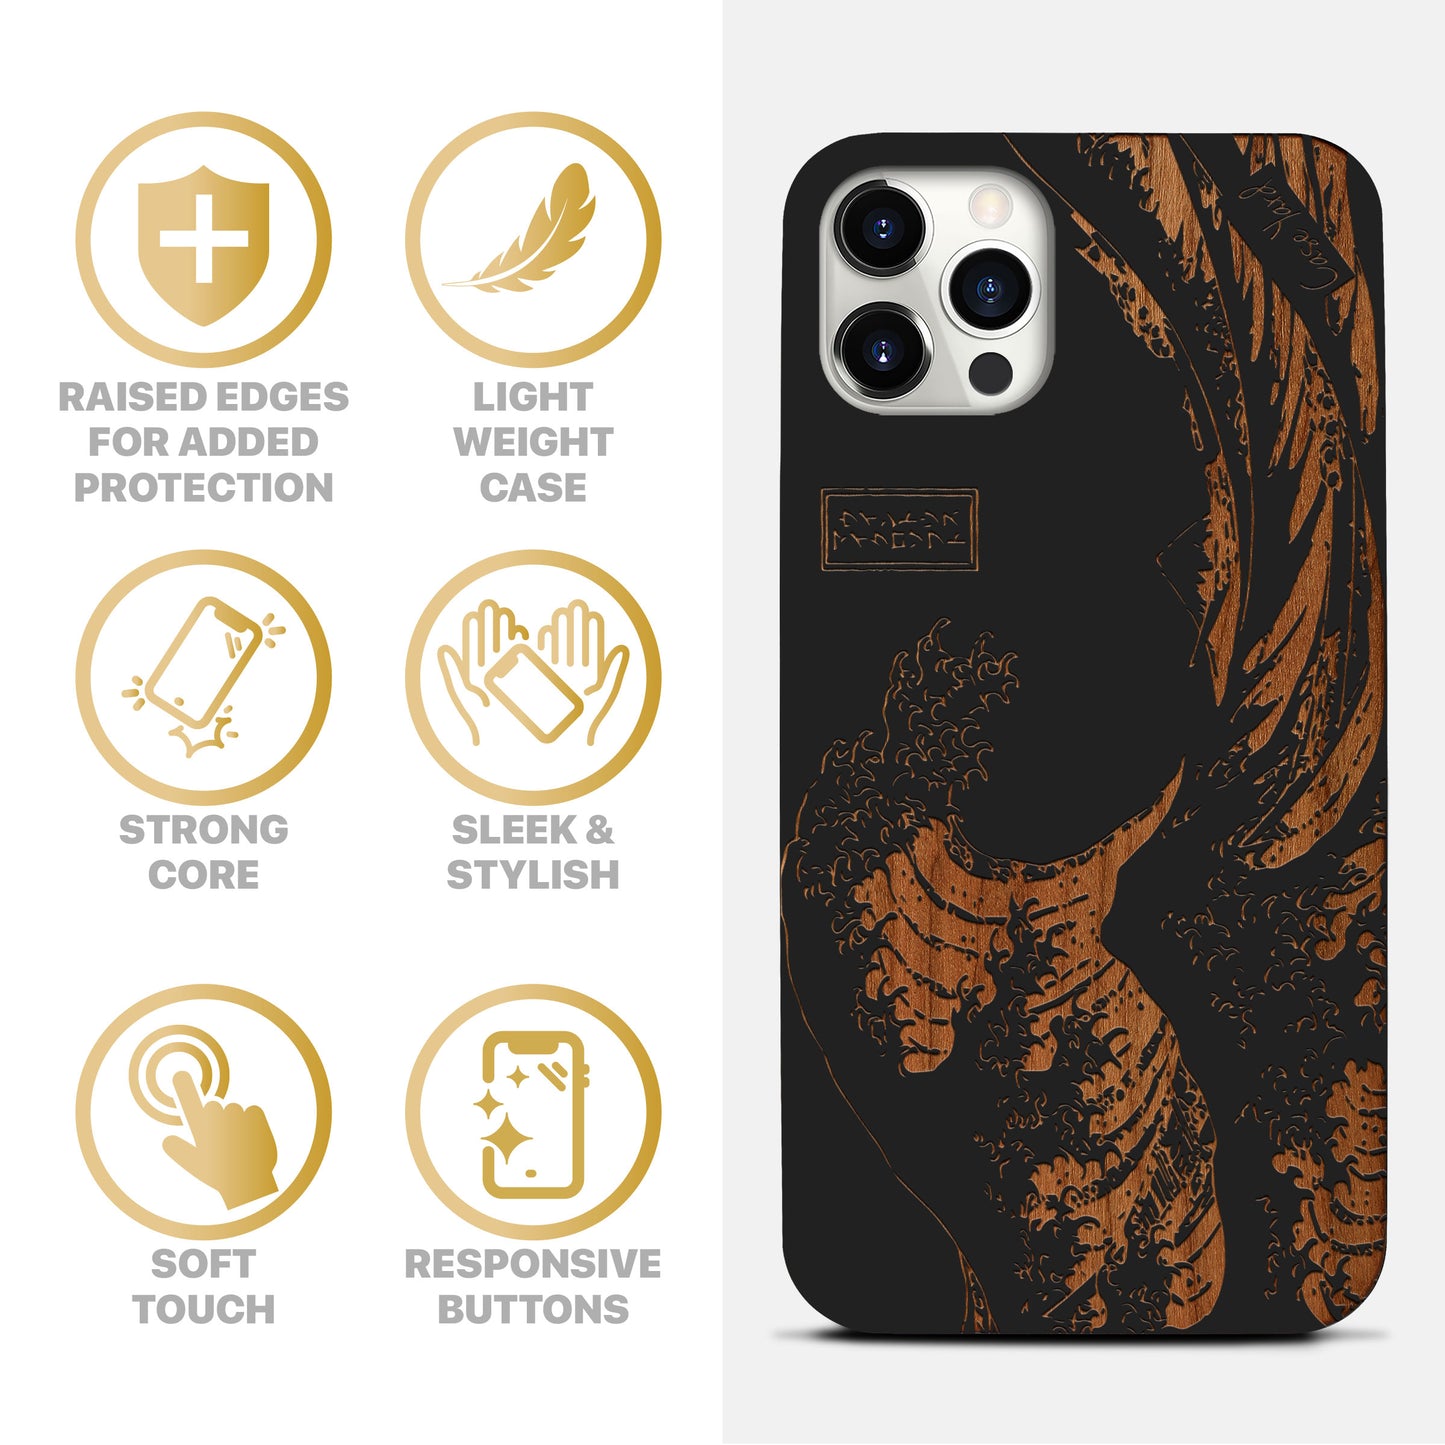 Wooden Cell Phone Case Cover, Laser Engraved case for iPhone & Samsung phone Great Wave Design